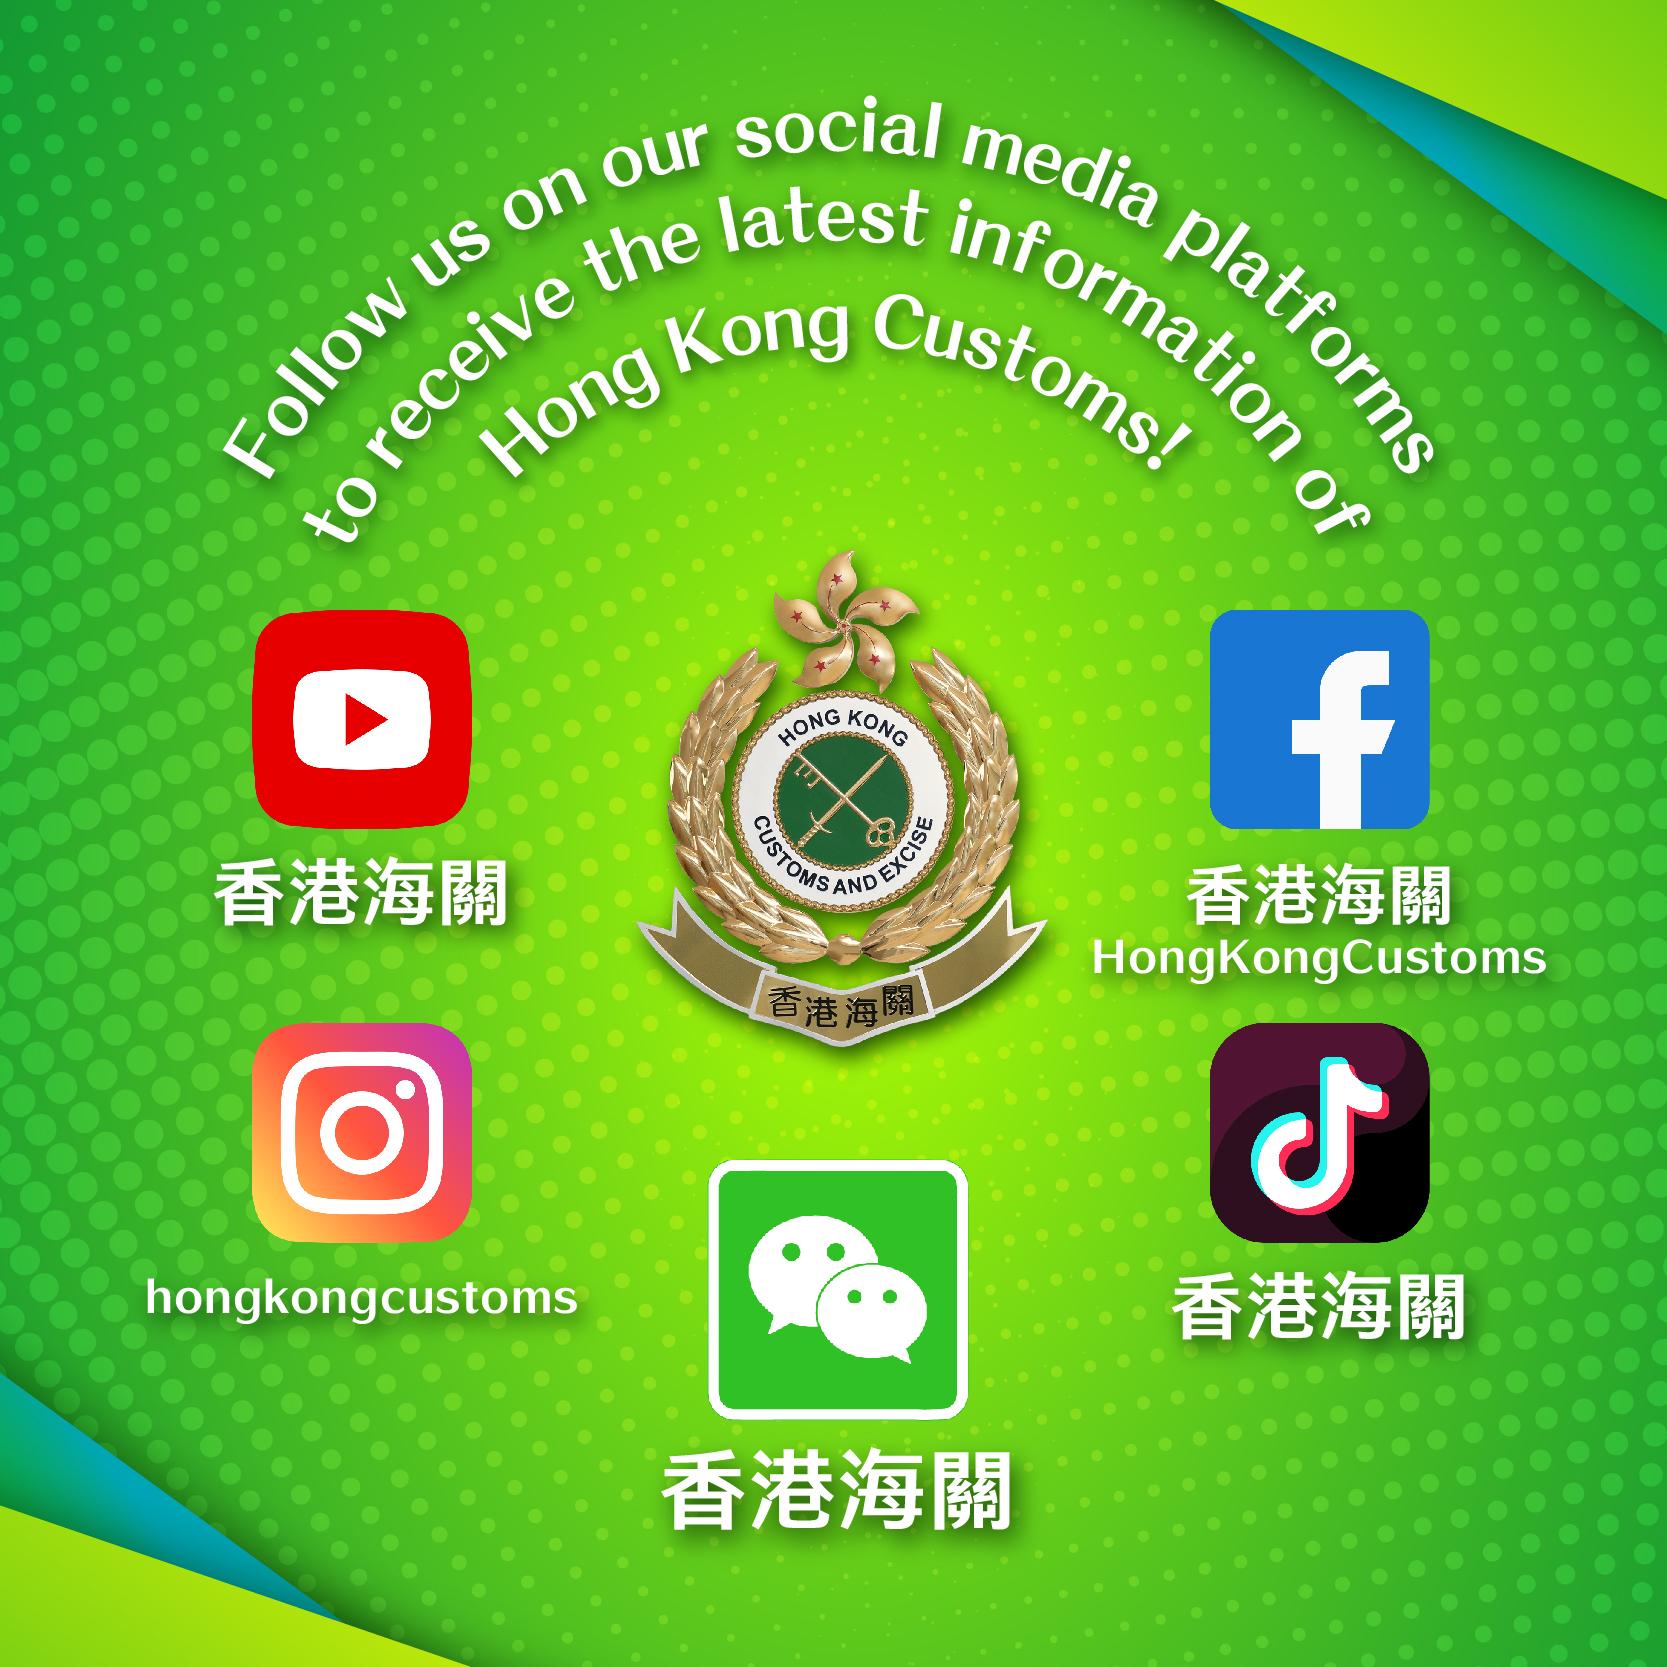 Hong Kong Customs launched its WeChat official account today (July 1). This is the fifth official social media platform of Customs in addition to its YouTube channel, Facebook page, Instagram account and Douyin official account.